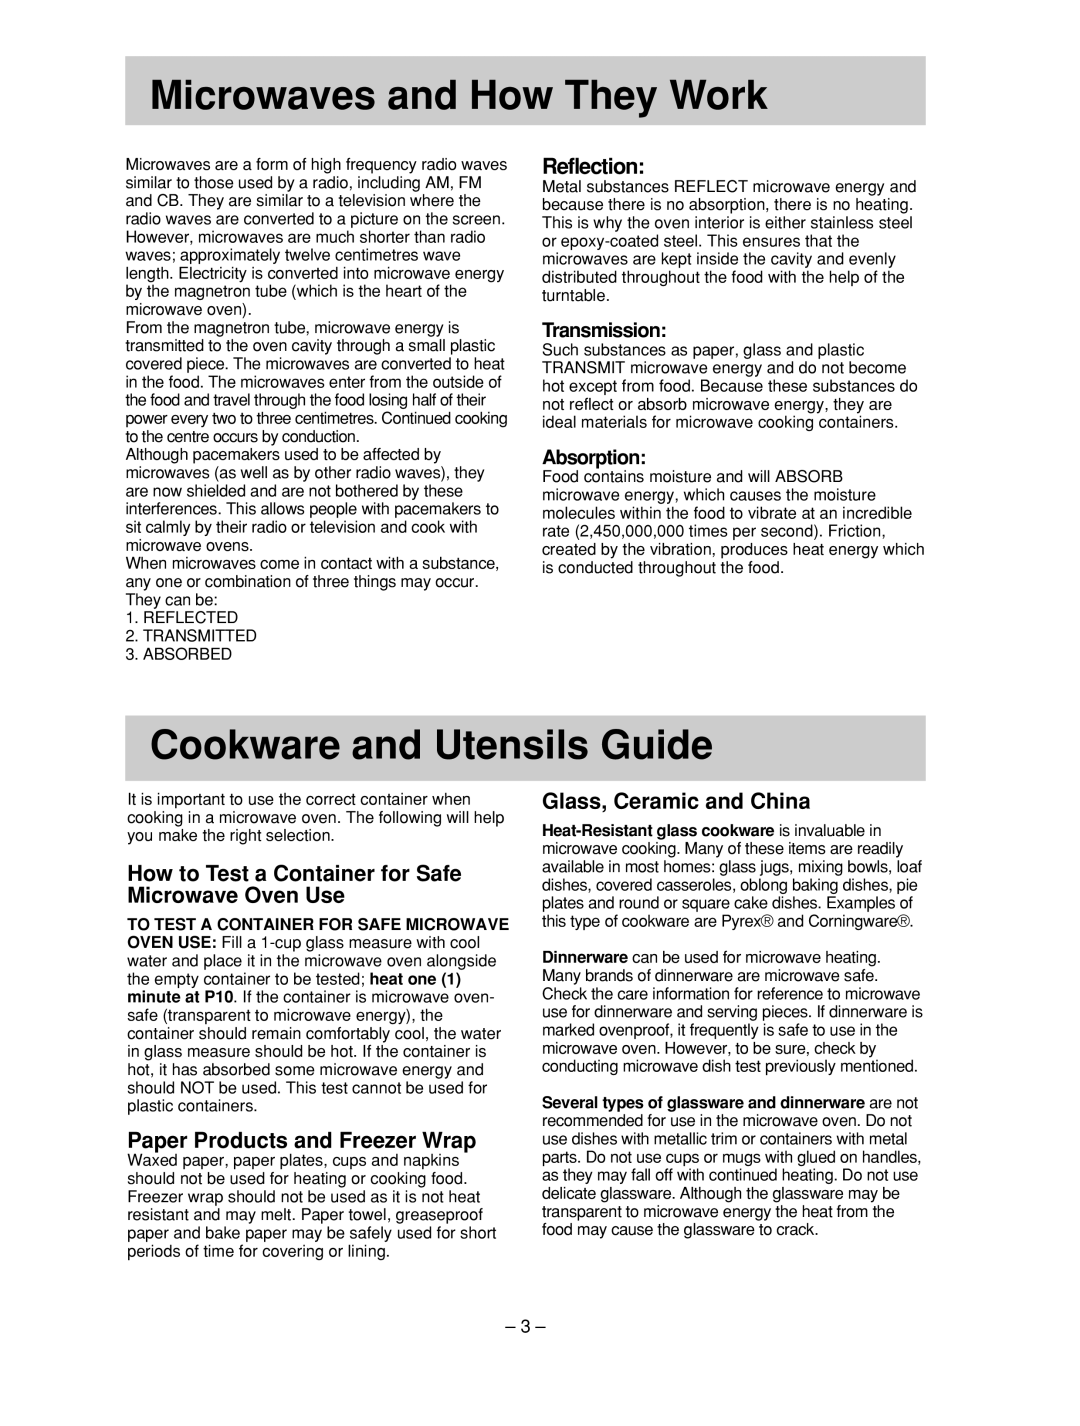 Panasonic NN-ST667W Microwaves and How They Work, Cookware and Utensils Guide, Reflection, Paper Products and Freezer Wrap 